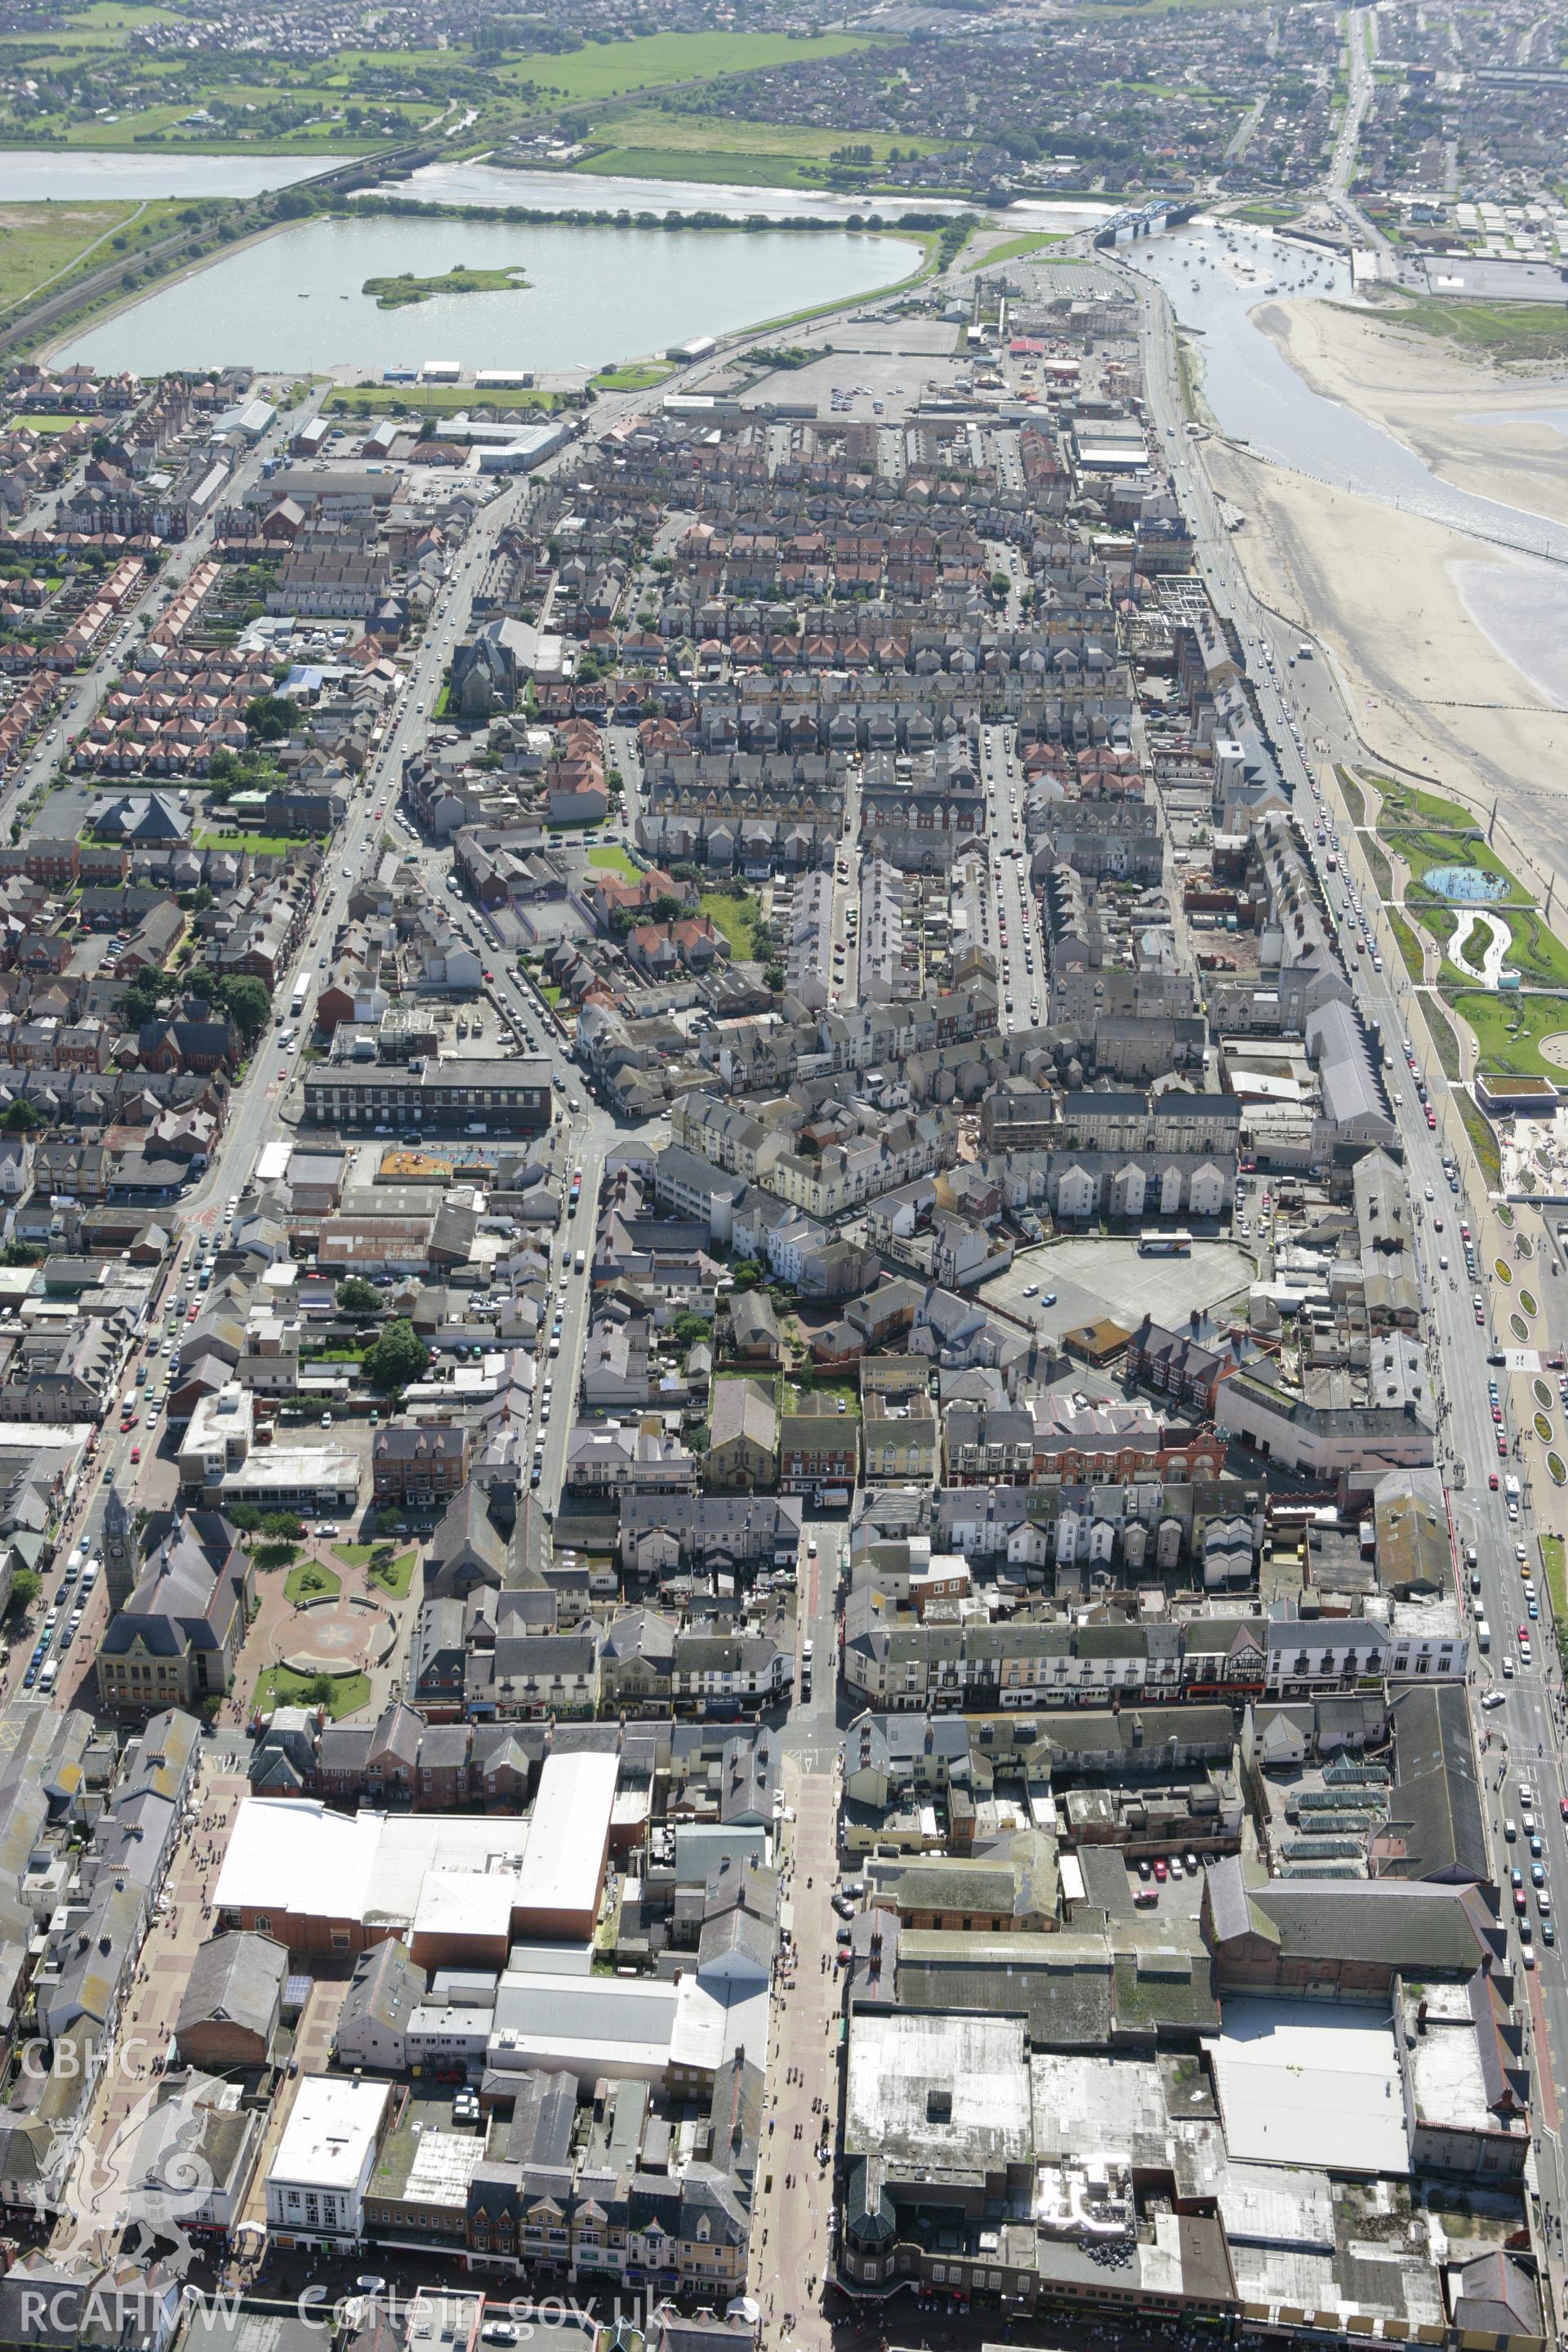 RCAHMW colour oblique aerial photograph of Rhyl looking south-west. Taken on 31 July 2007 by Toby Driver